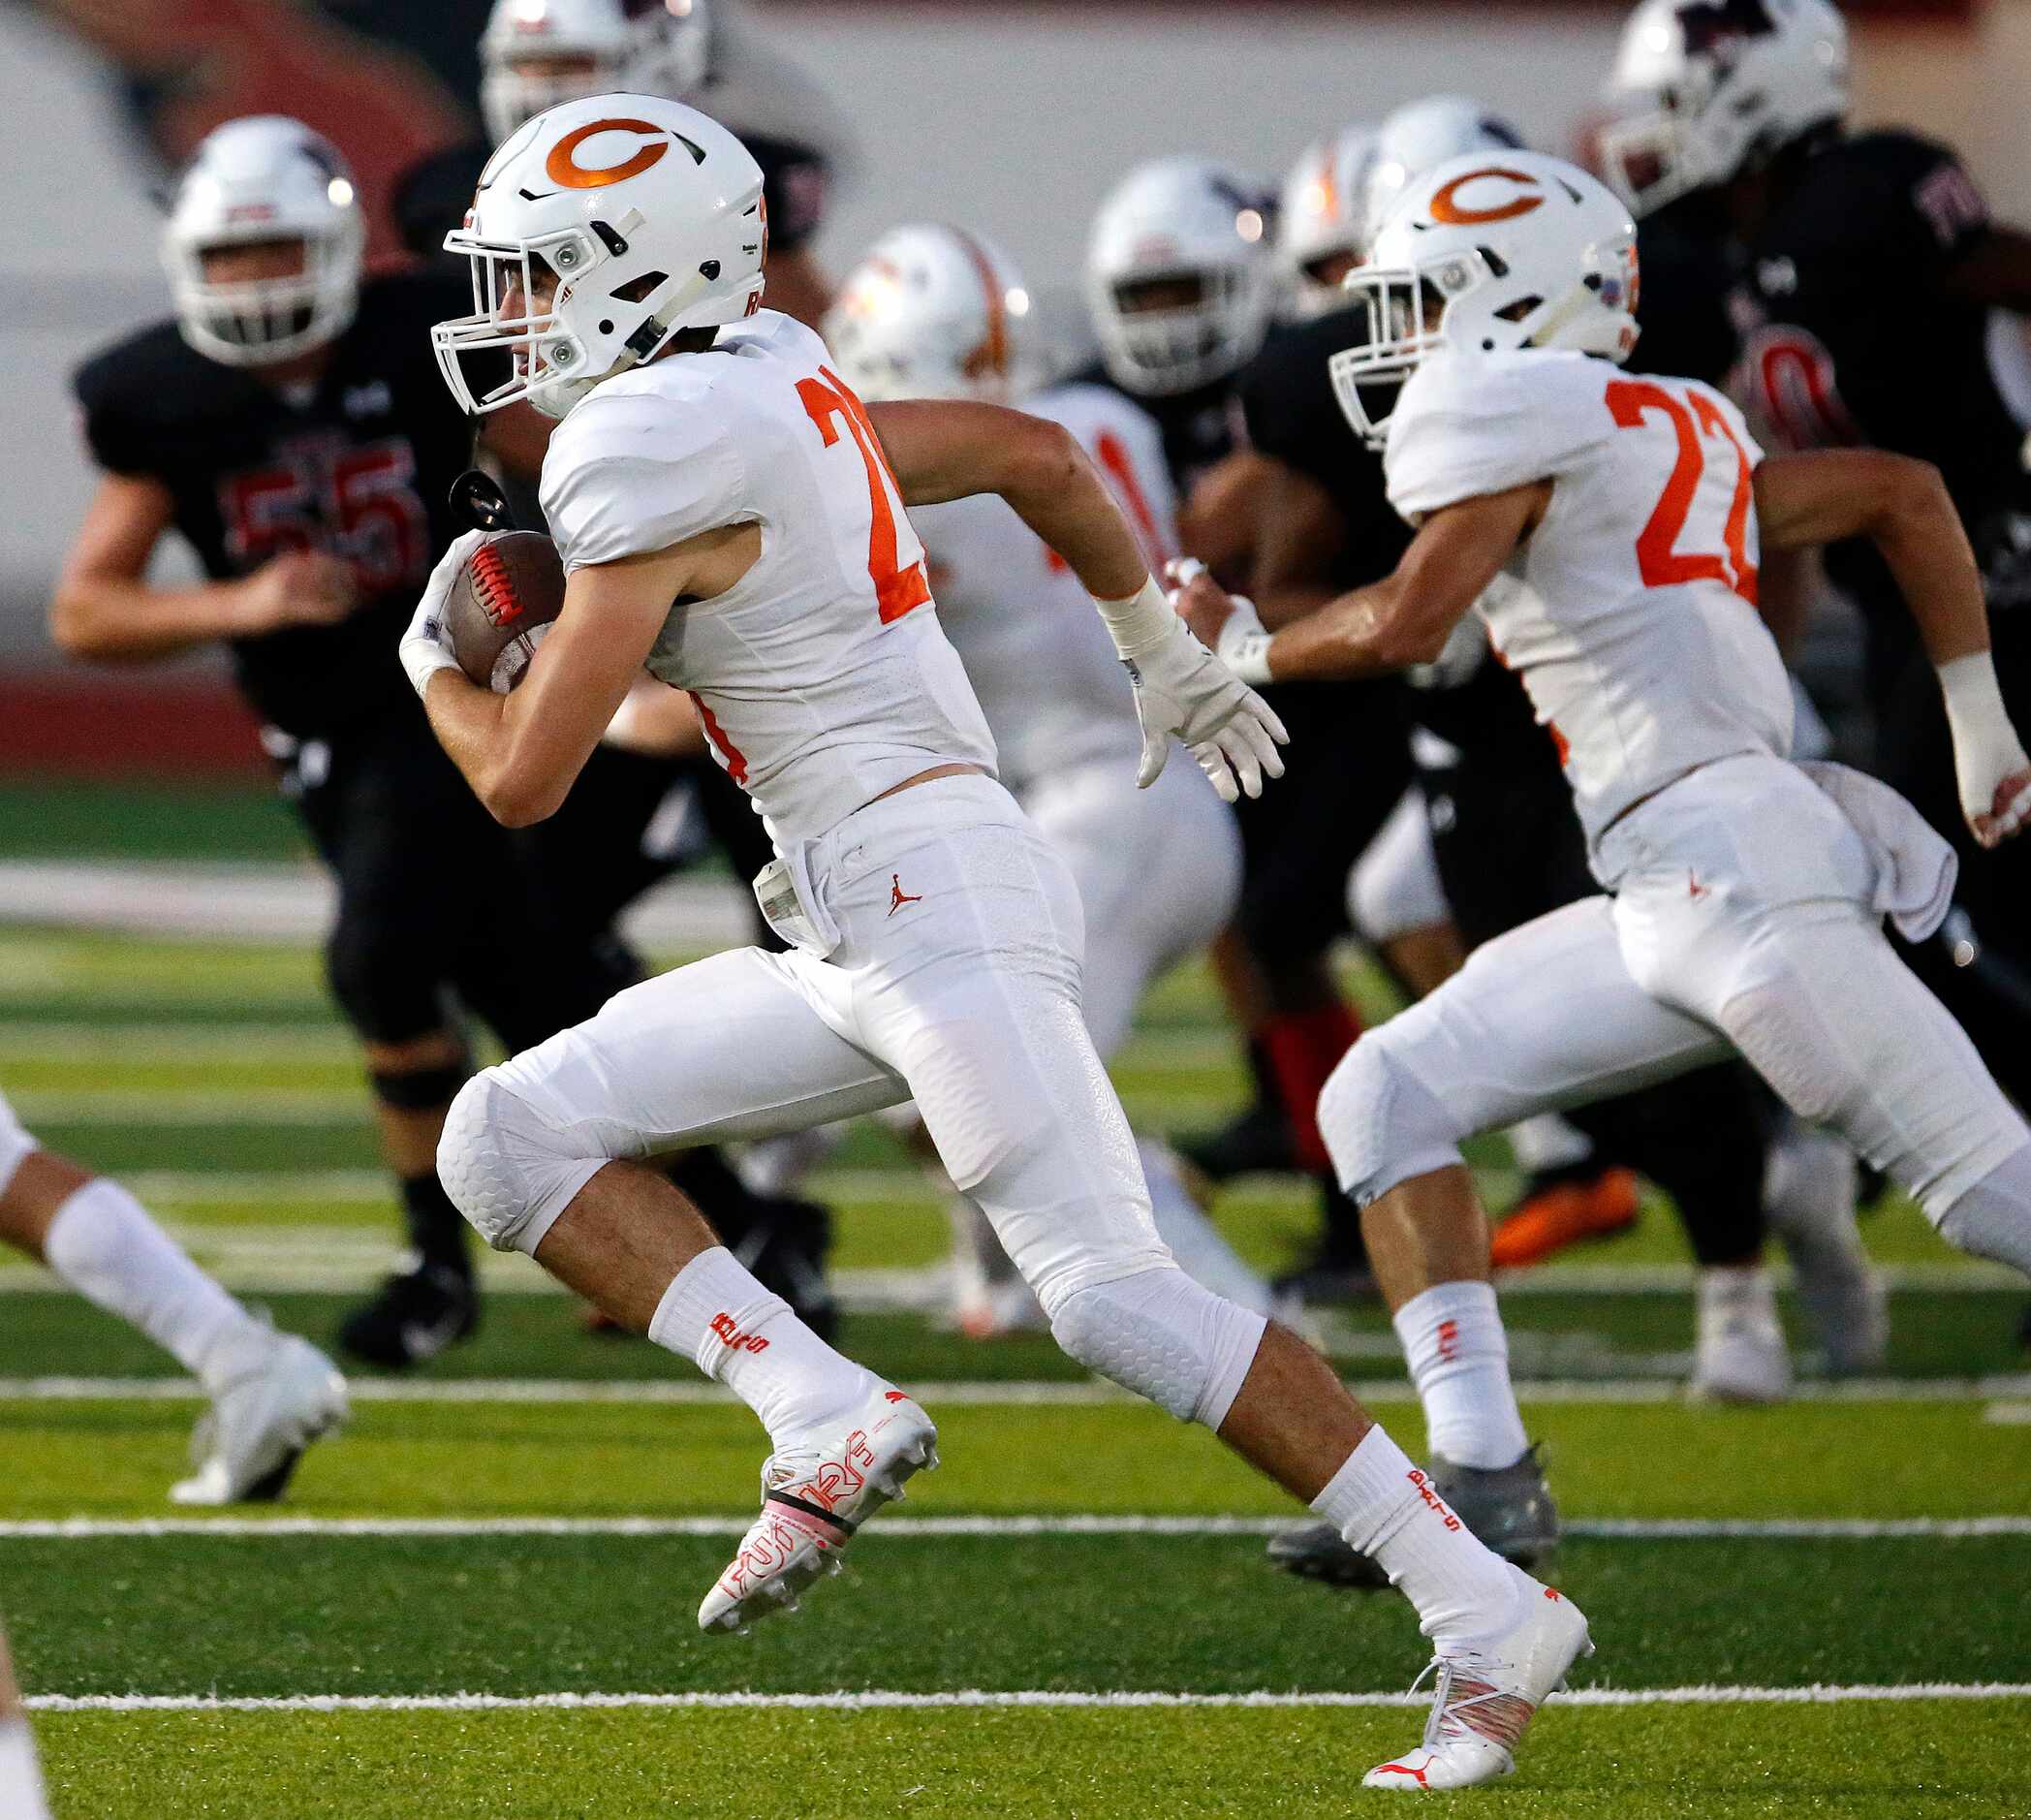 Celina High School wide receiver Joshua Defrank (21) gets yardage after the catch during the...